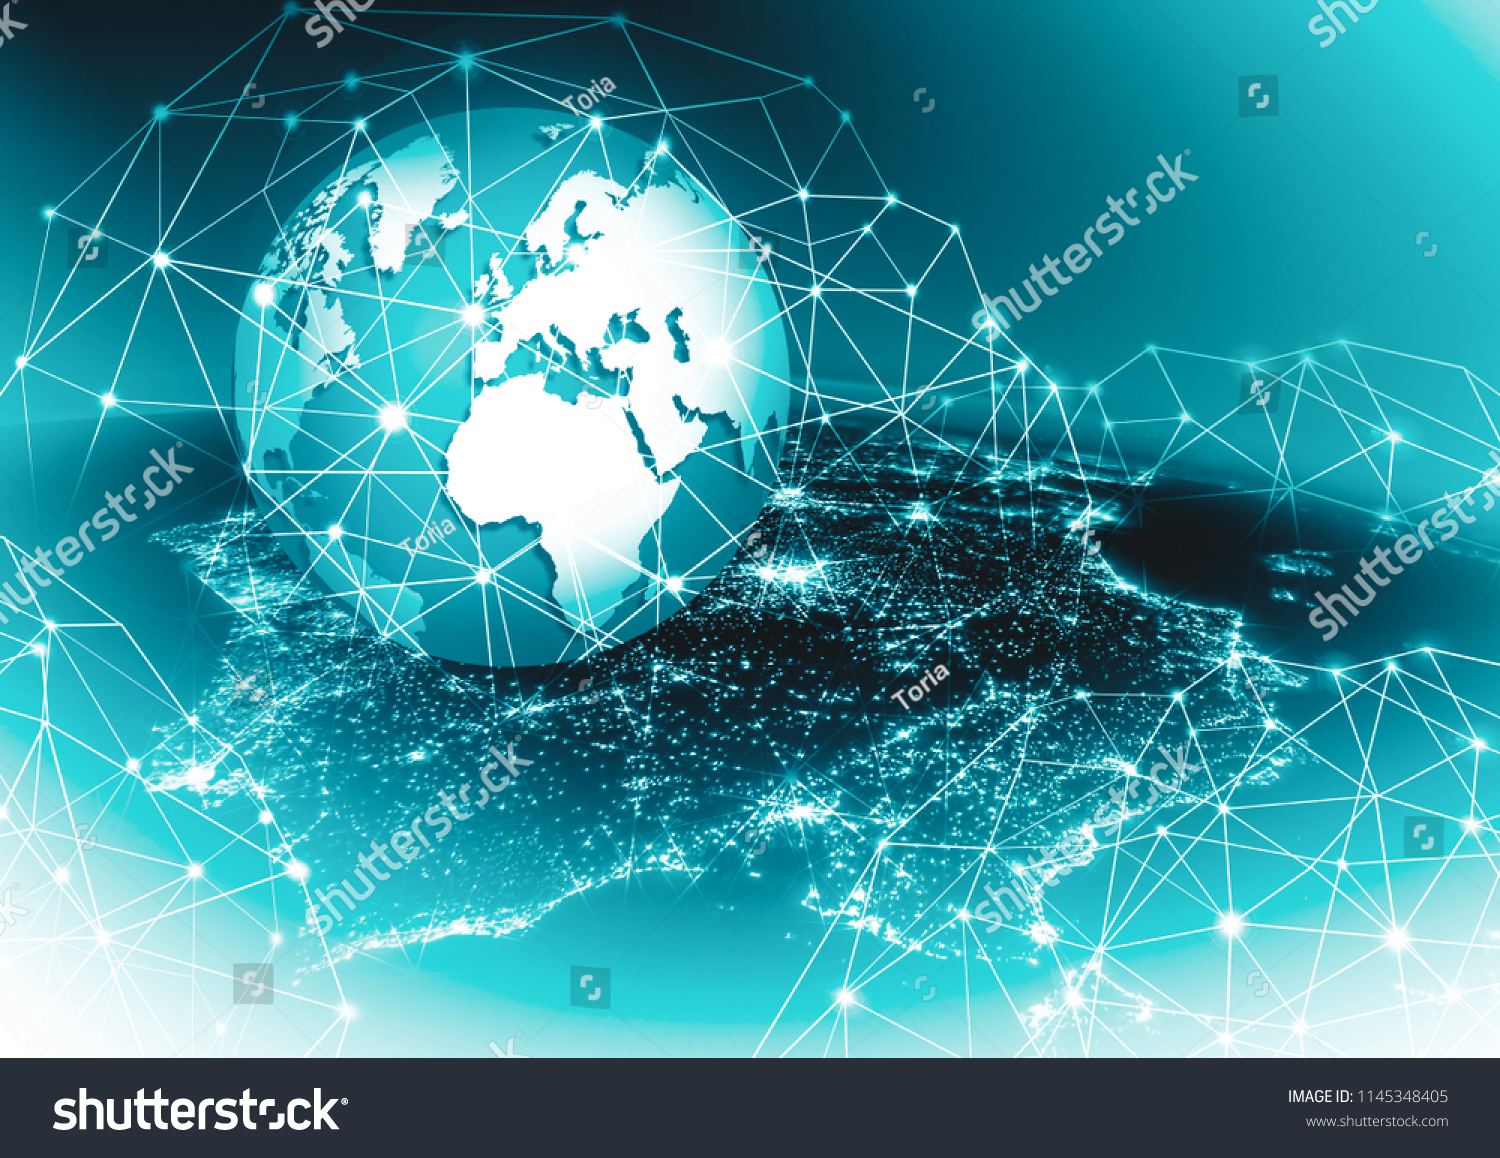 Earth from Space. Best Internet Concept of global business from concepts series. Elements of this image furnished by NASA. 3D illustration #1145348405